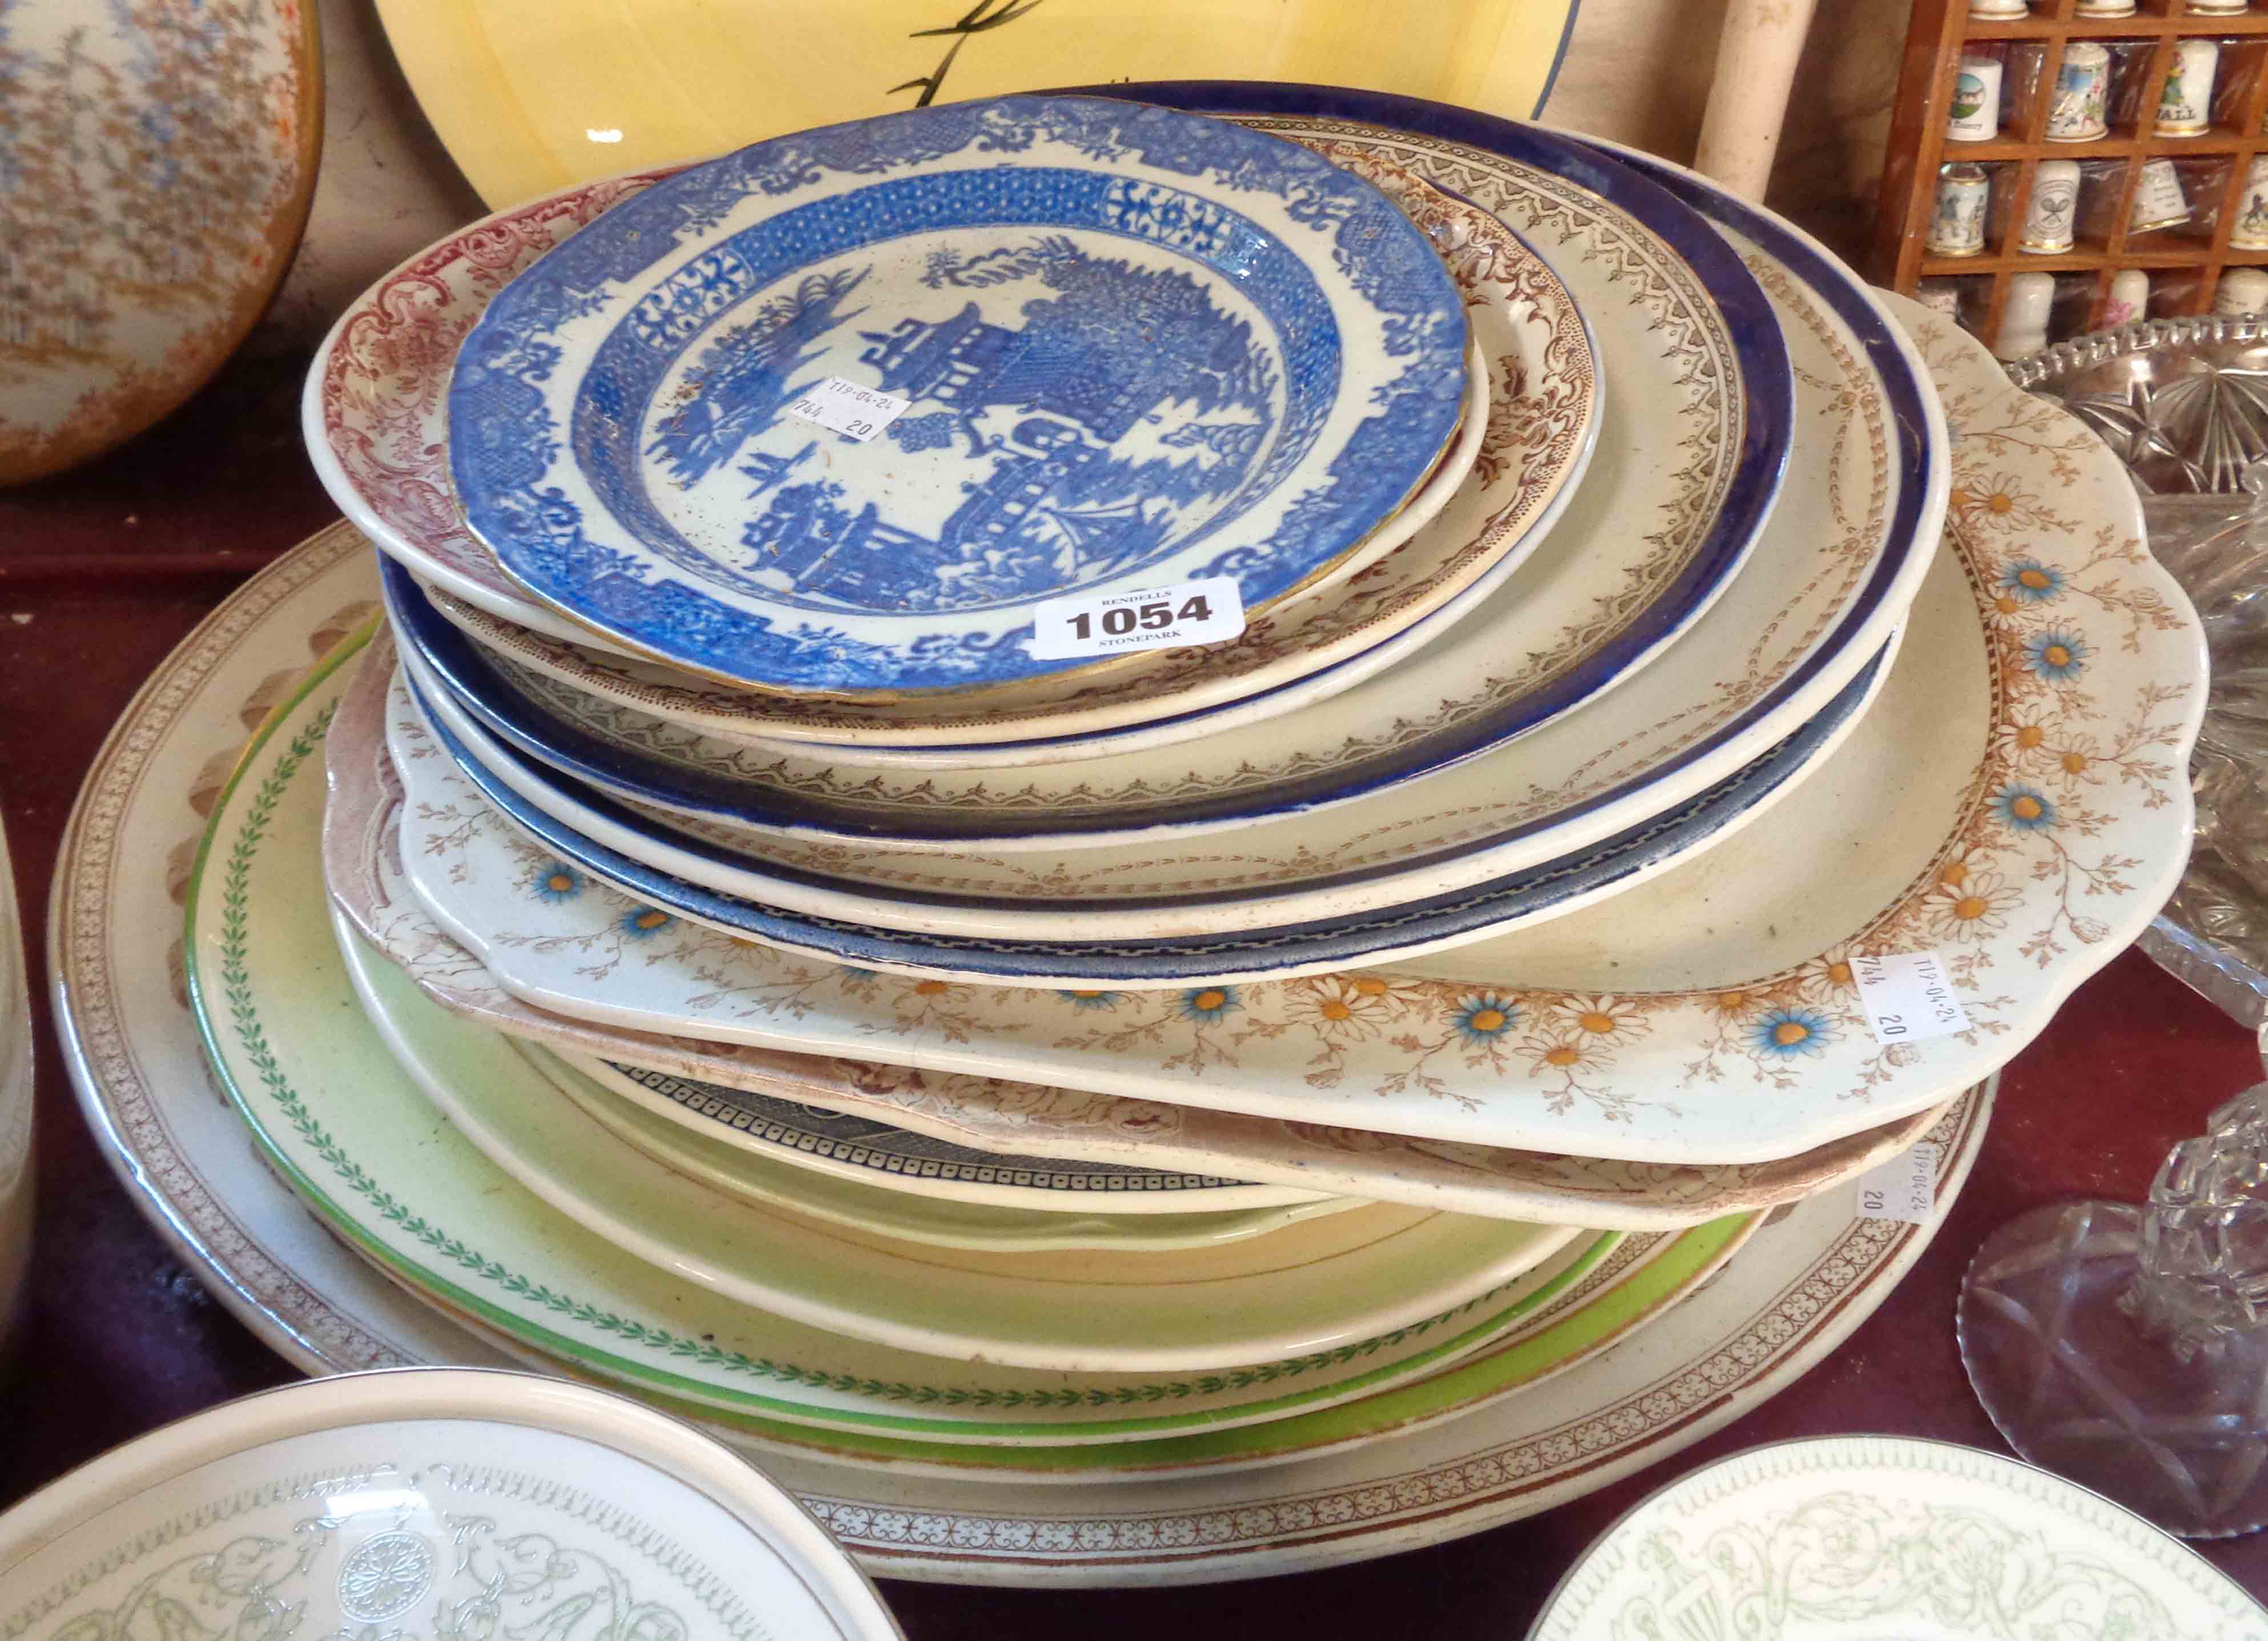 A quantity of ceramic meat plates of various size, maker and design - sold with a 19th Century